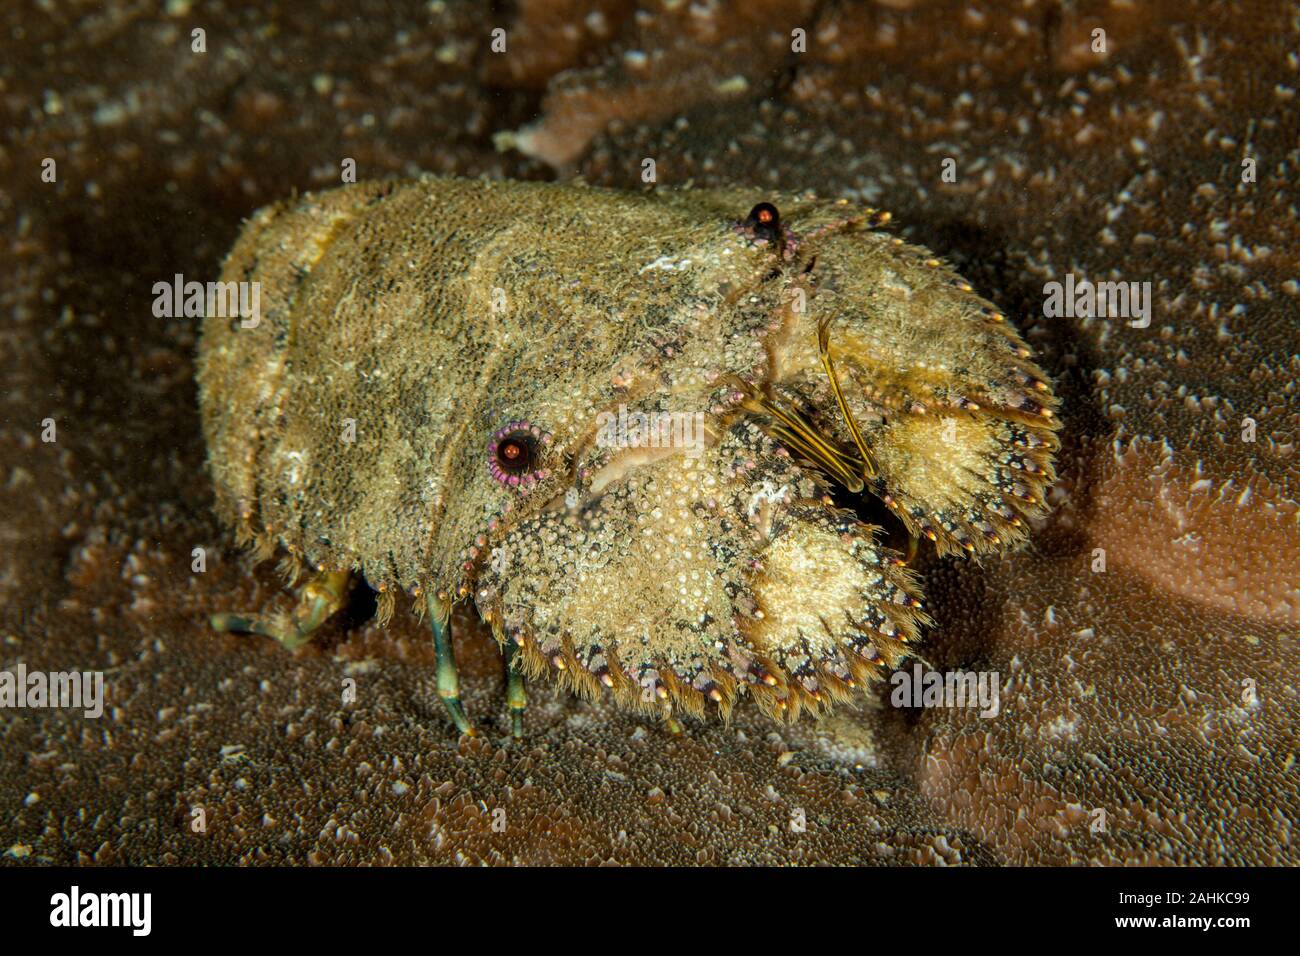 Slipper Lobster, Parribacus caledonicus Stock Photo